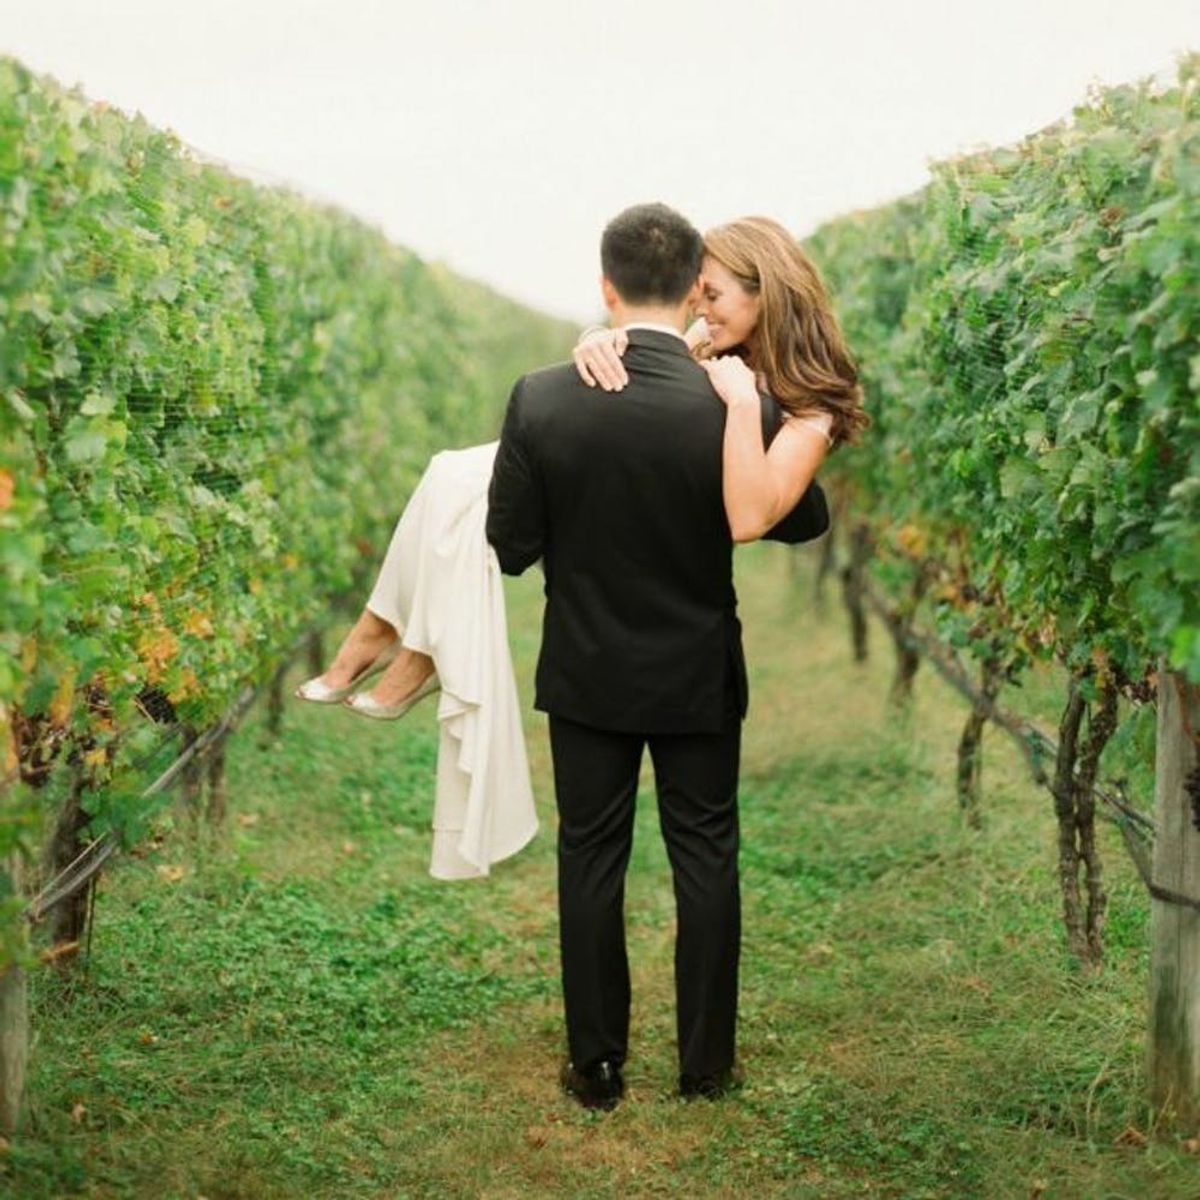 17 Creative Ideas for Planning a Romantic Winery Wedding